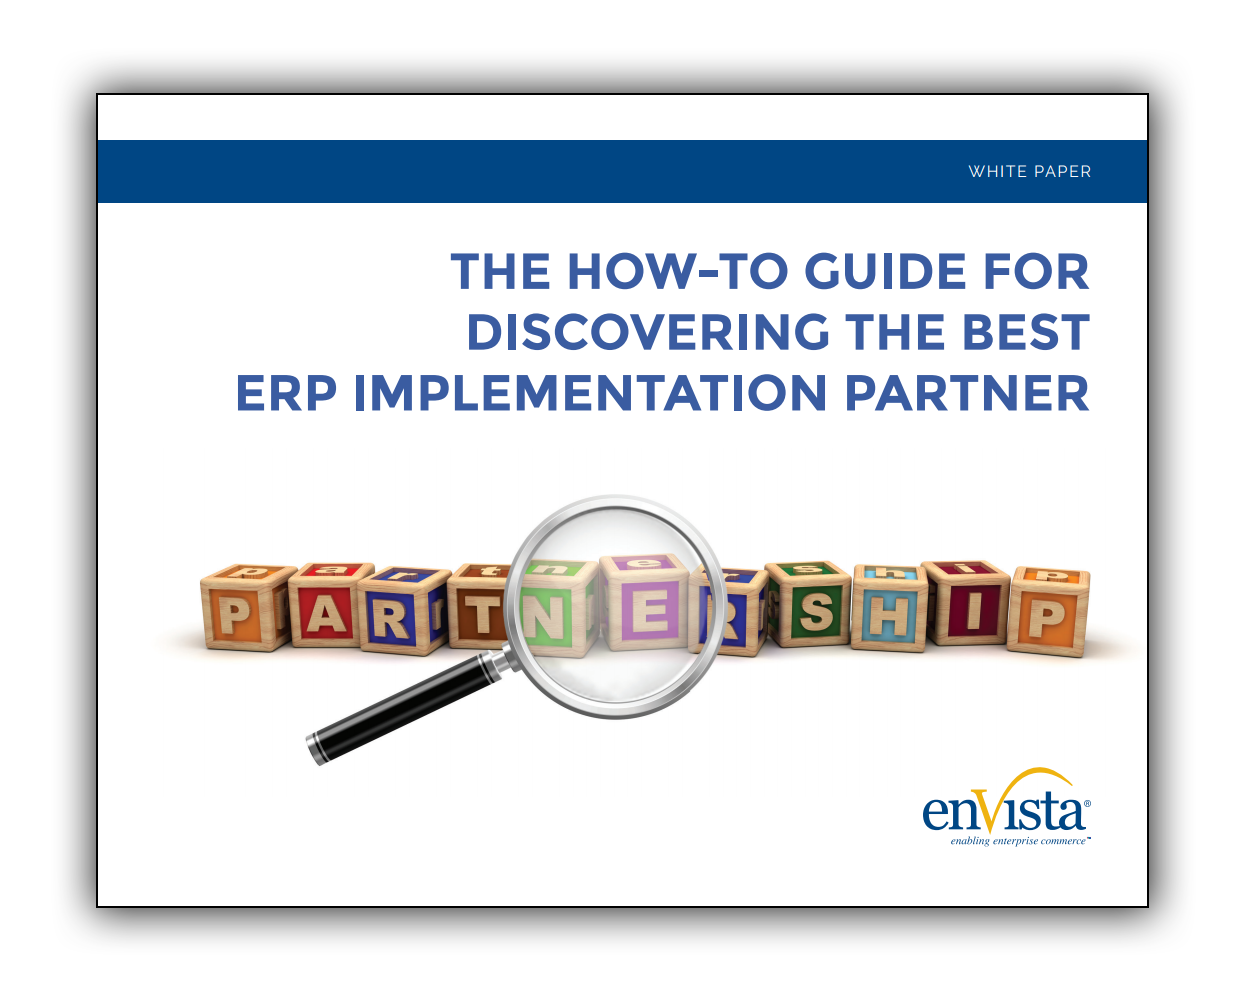 Image_how-to-guide-for-discovering-the-best-erp-implementation-partner.png